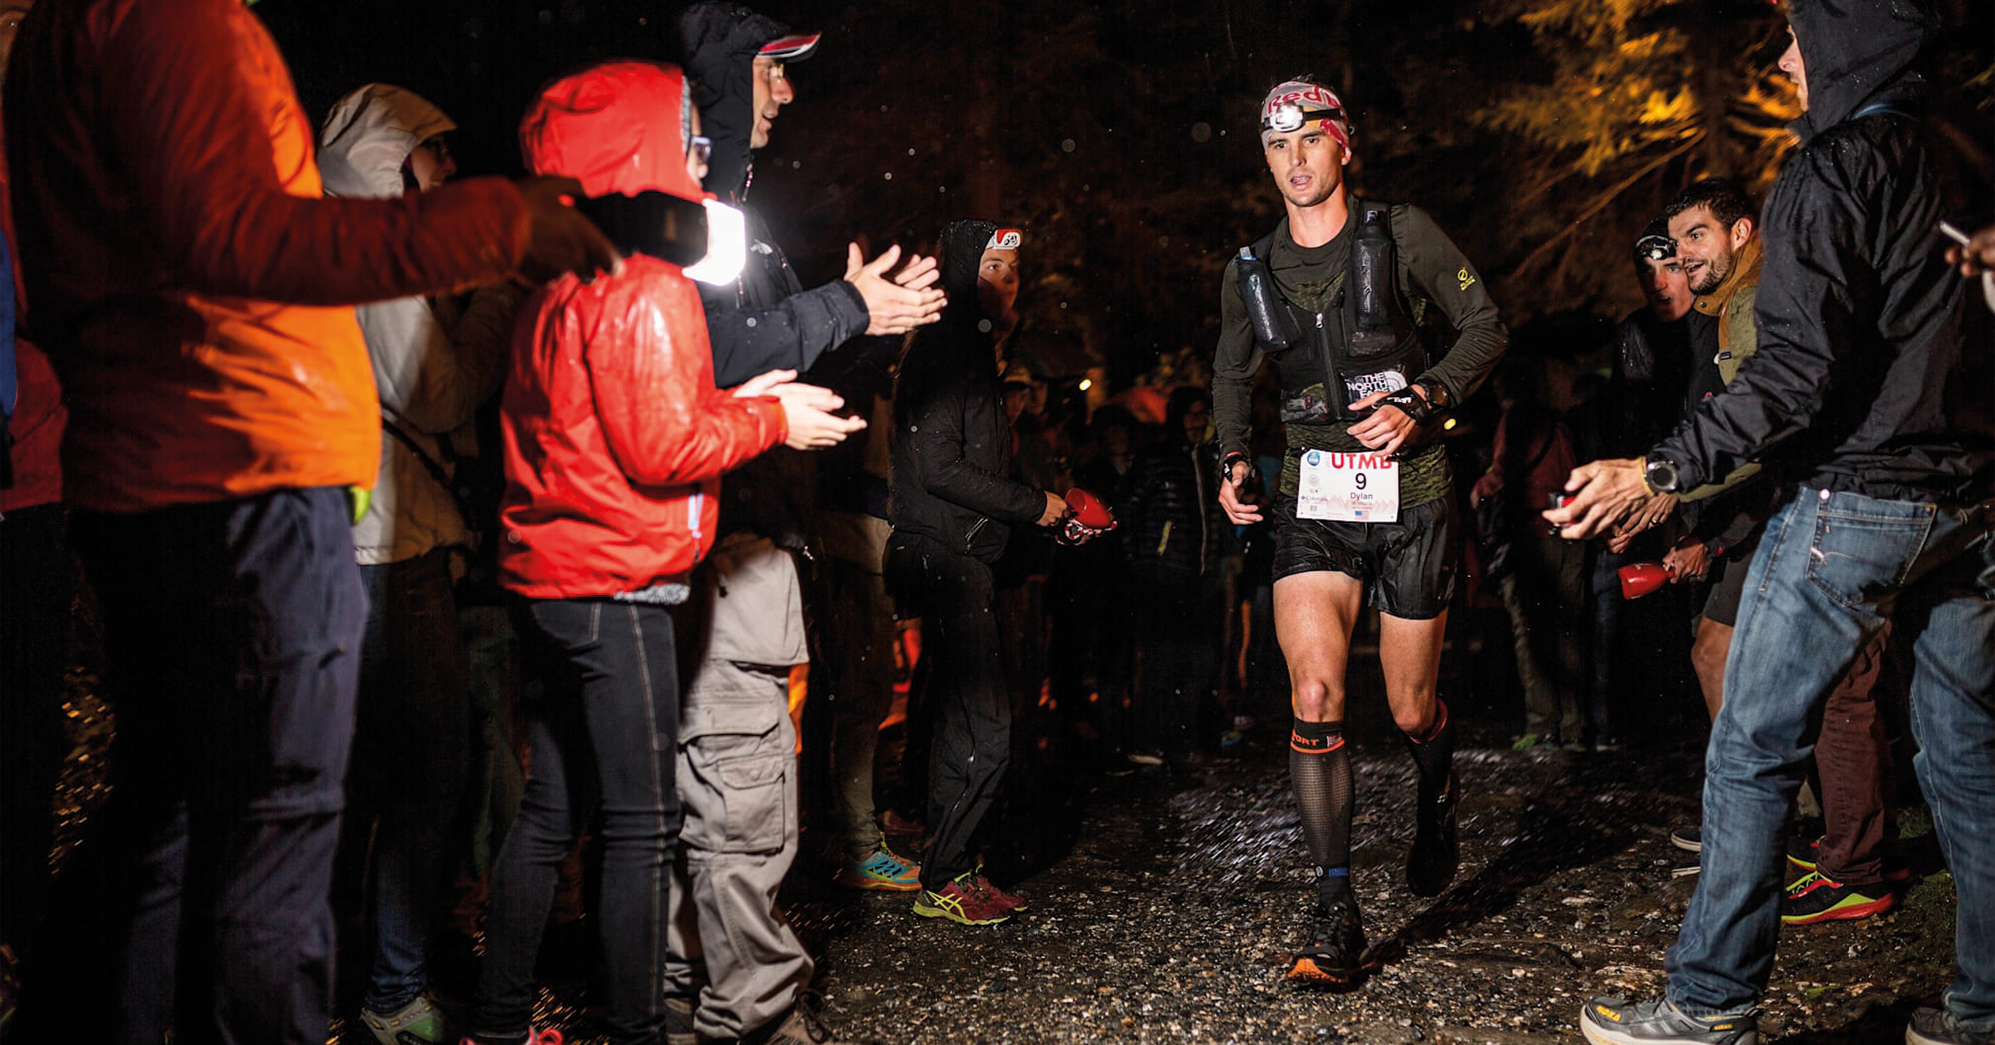 Dylan Bowman: The thrill of the 100-miler